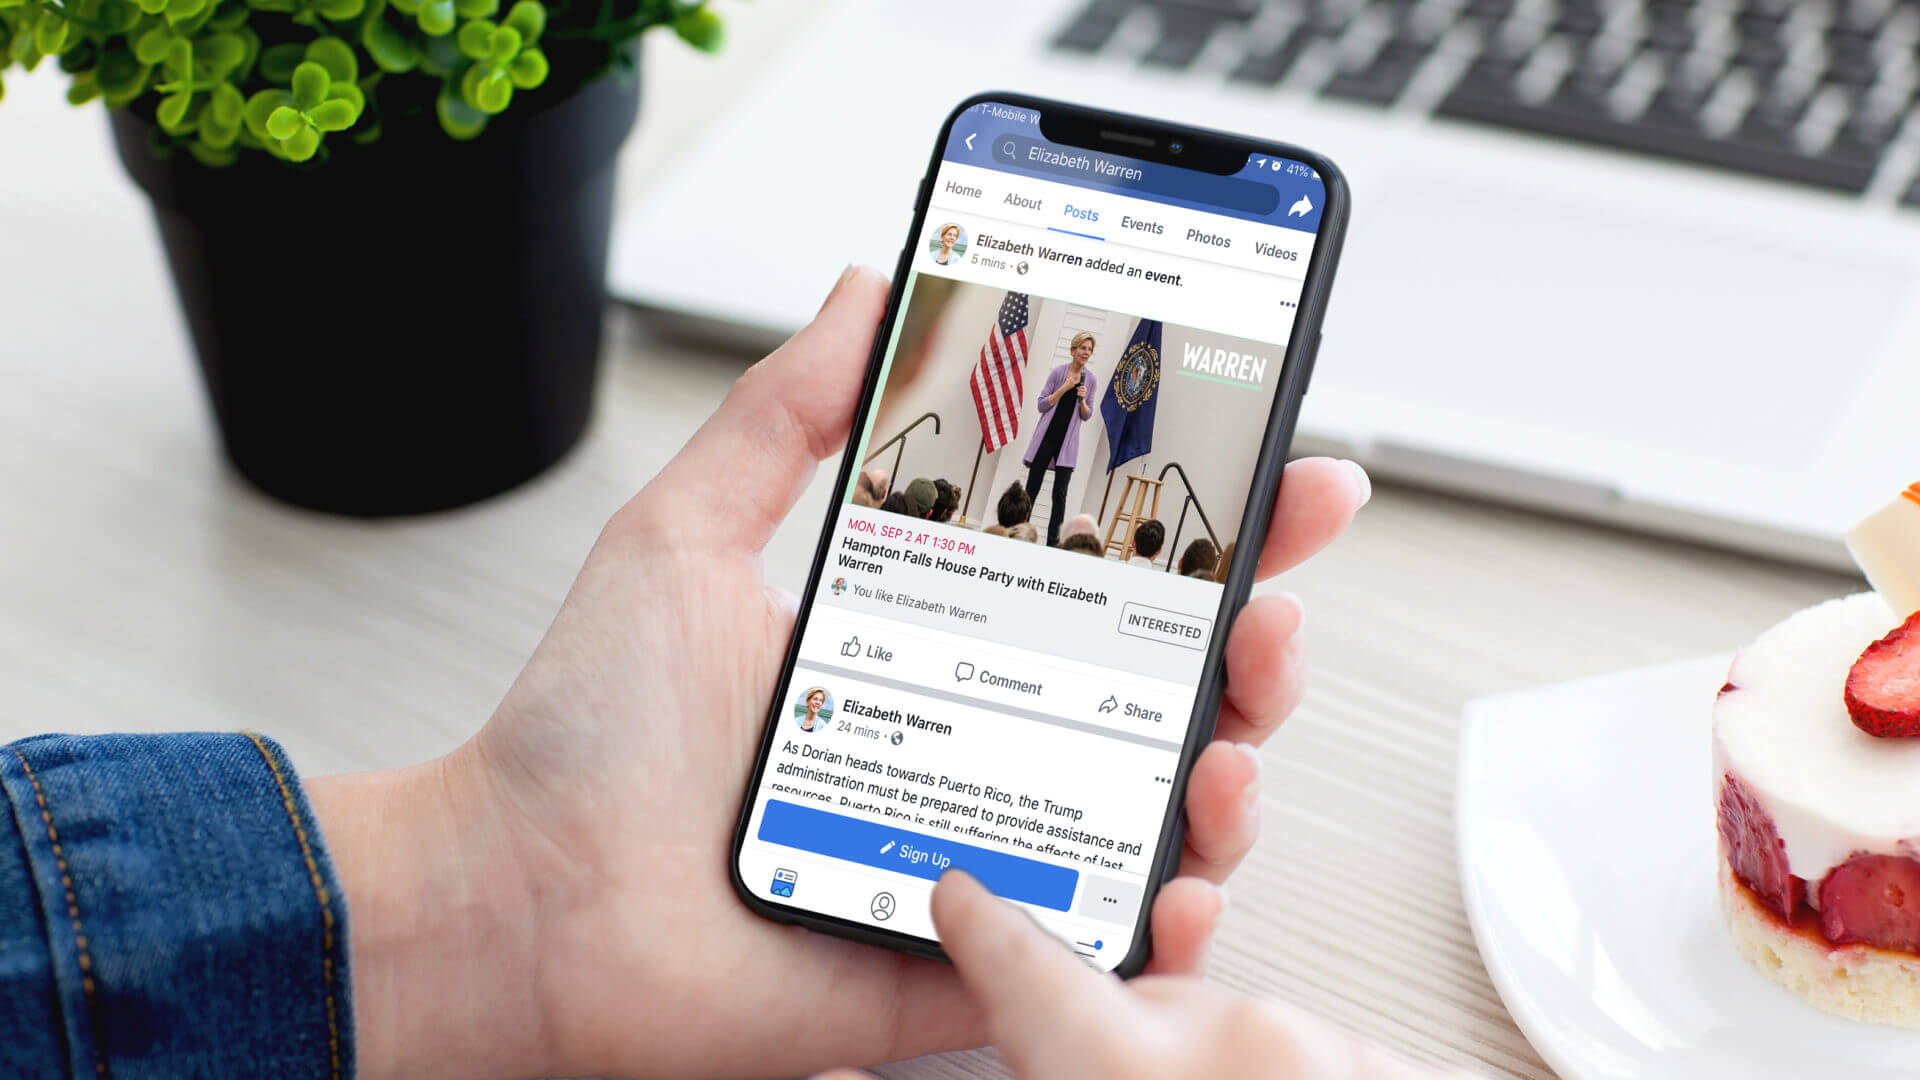 Facebook introduces new policies for political, social issue ads ahead of 2020 elections